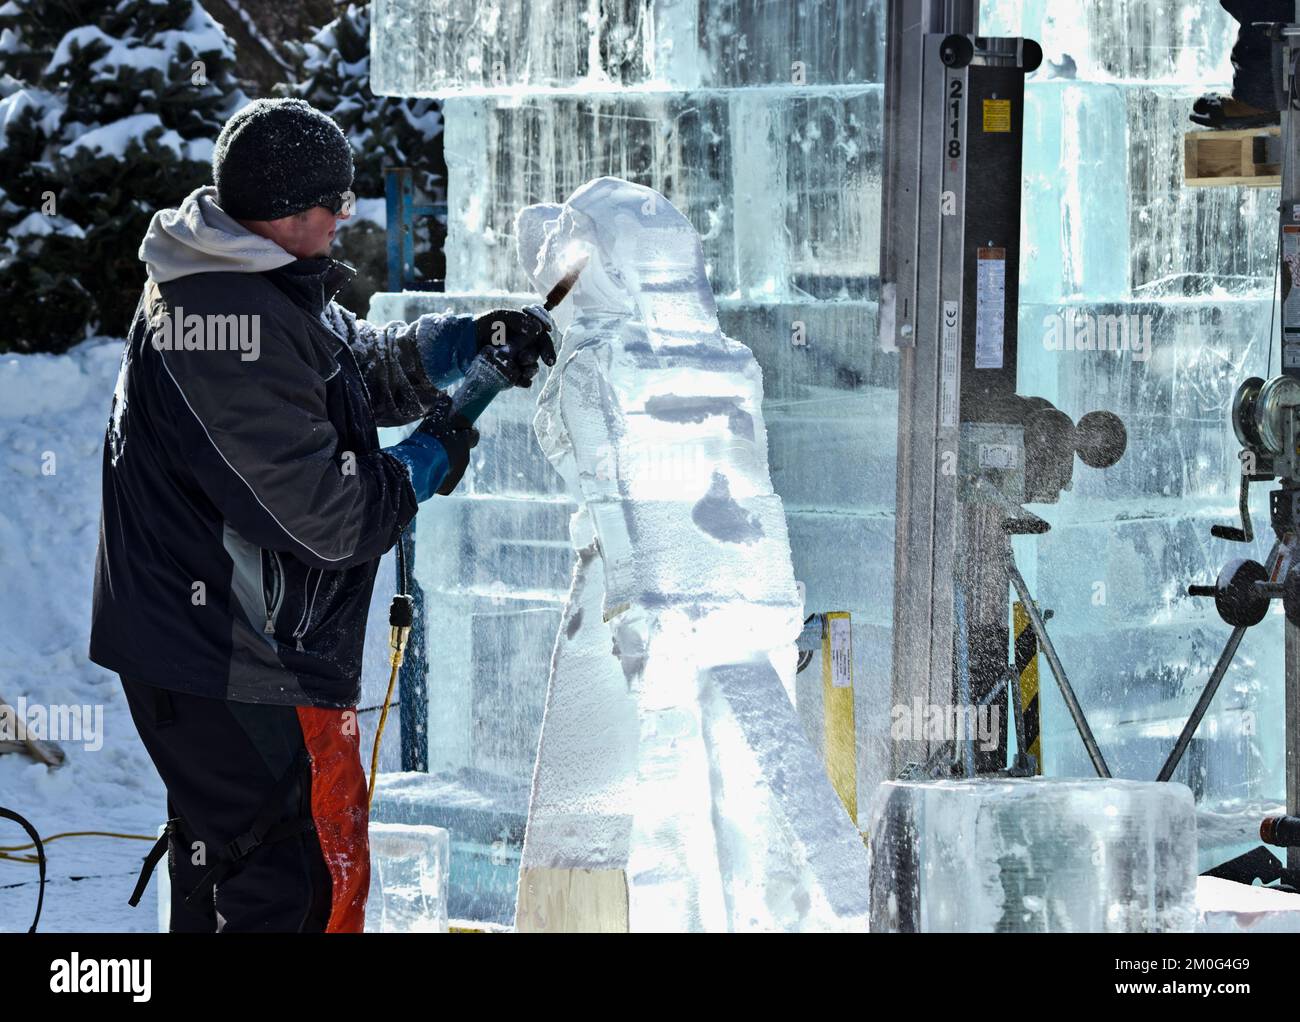 A man carves ice sculptures during a winter festival Stock Photo